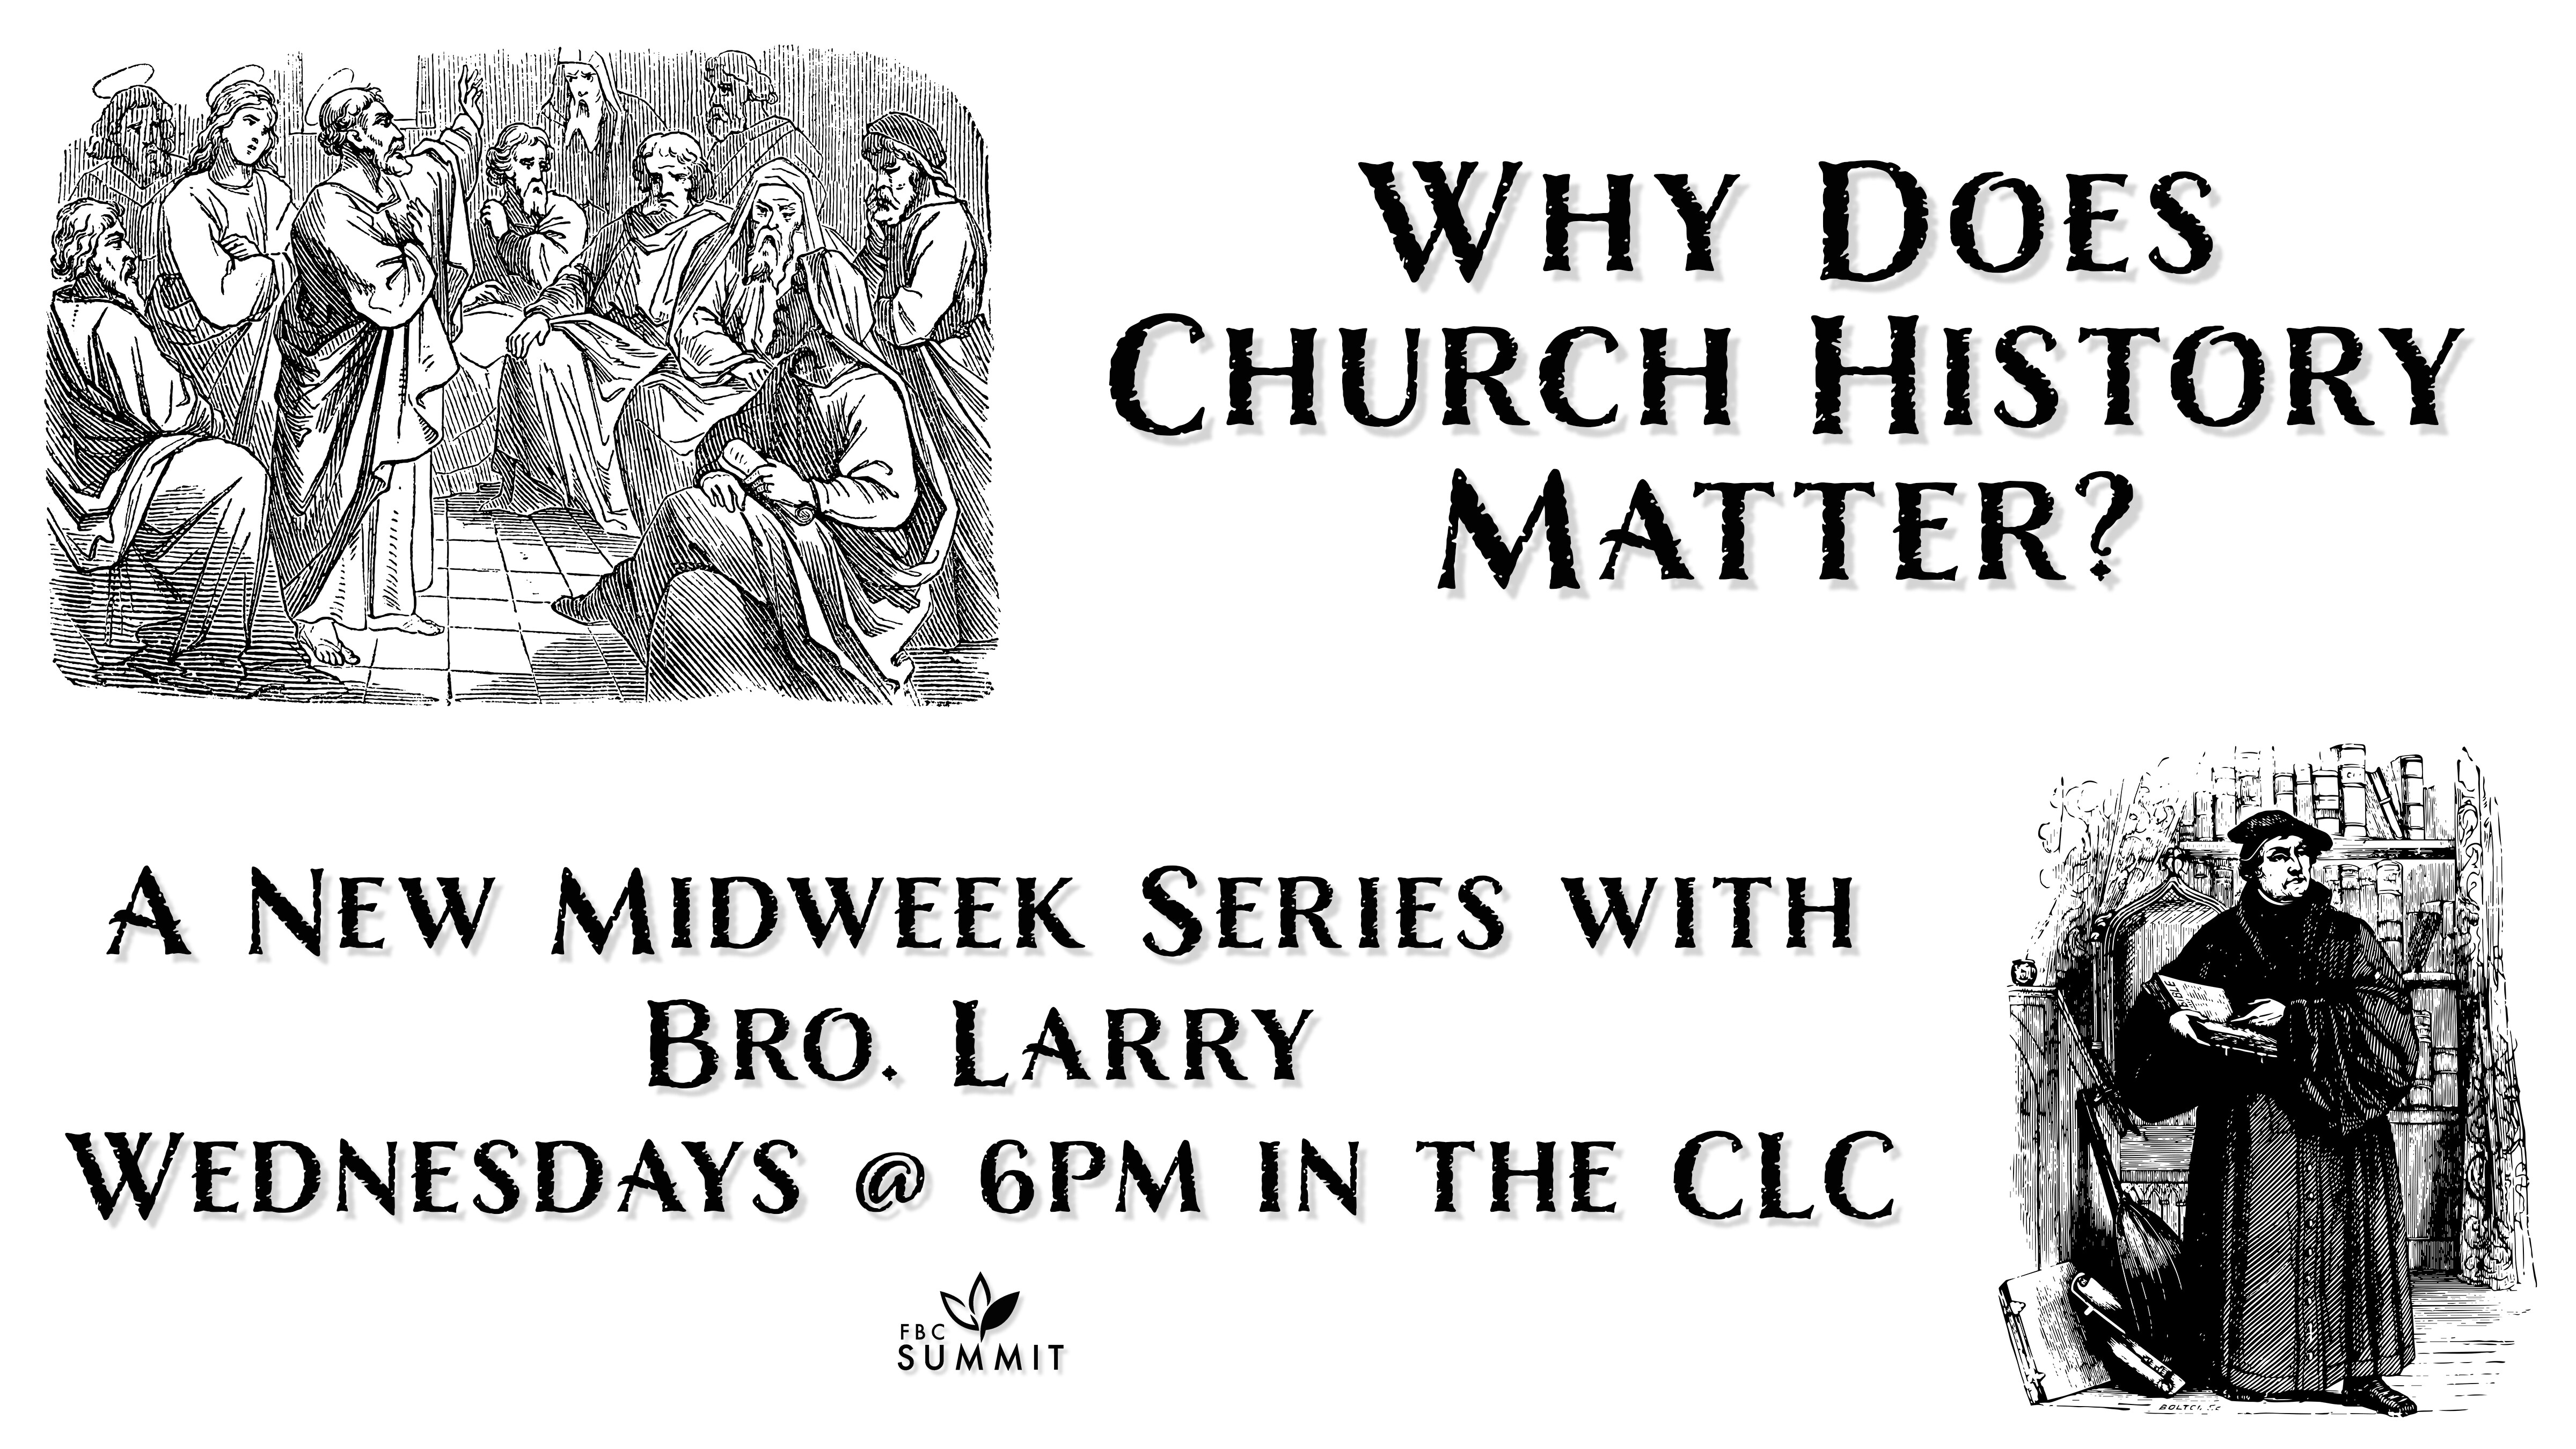 Midweek Bible Study "Why Does Church History Matter?" // Dr. Larry LeBlanc